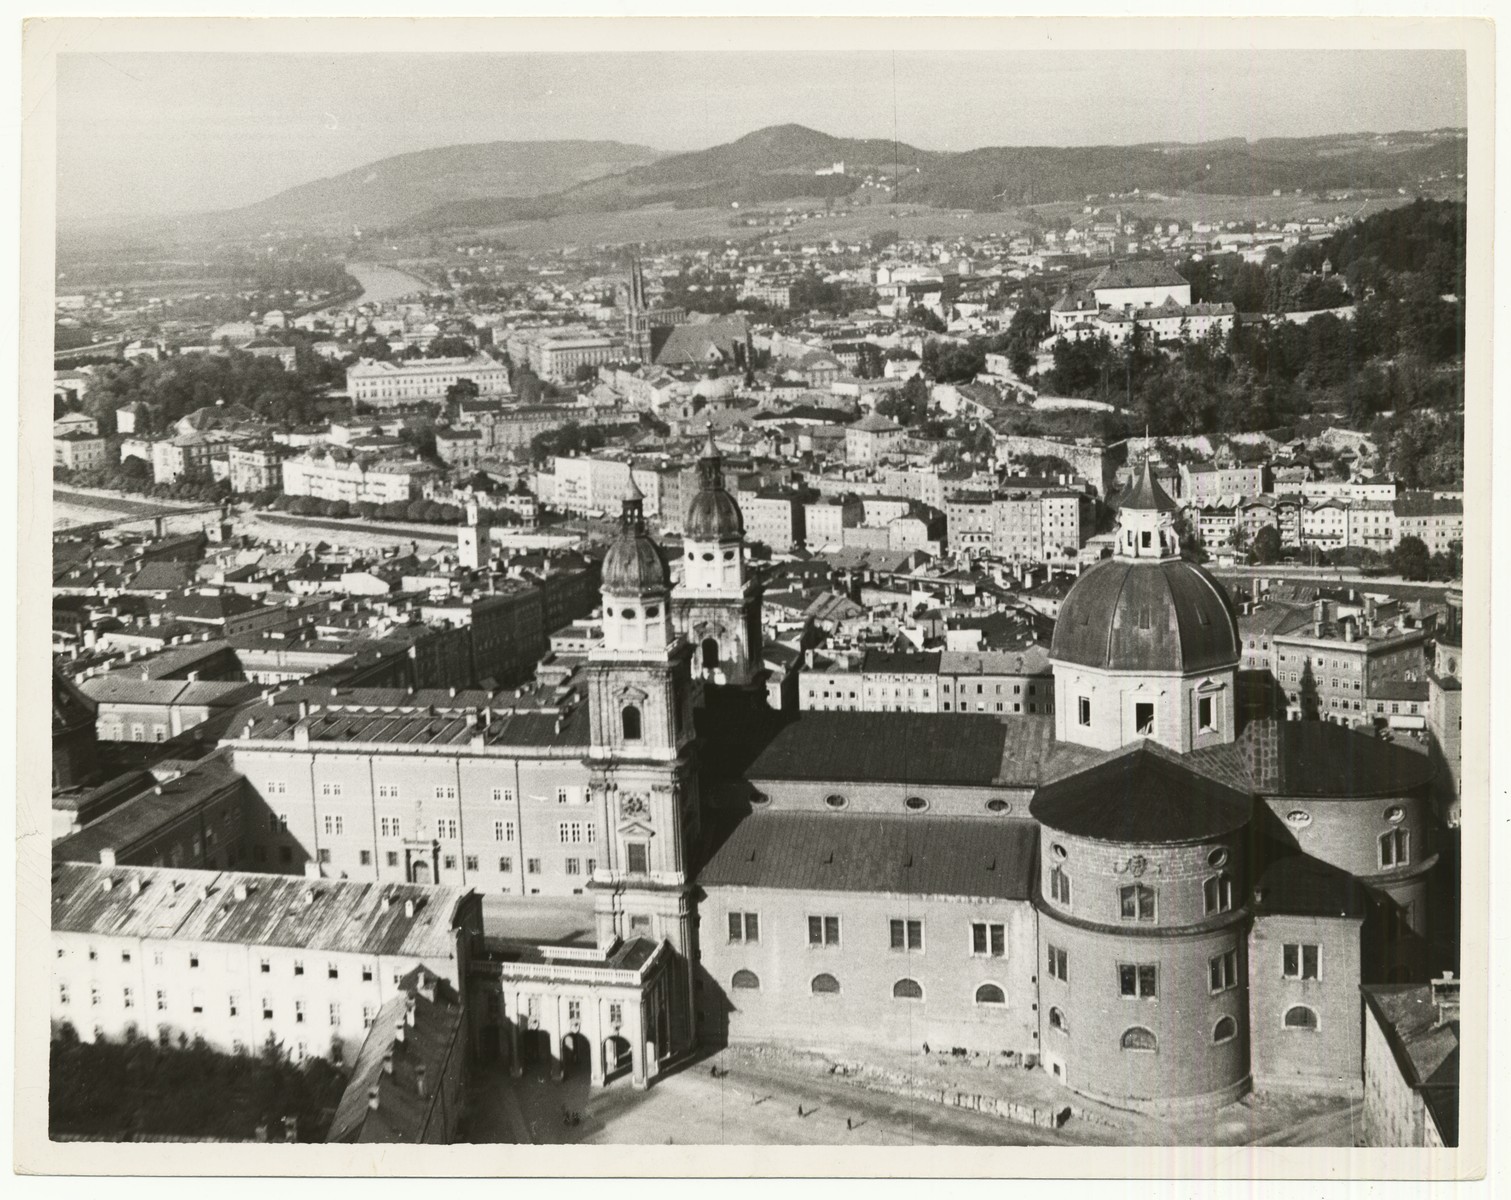 A view from Hohensalzburg Fortress in Salzburg, Austria.  In the foreground is the Salzburg Cathedral.

The handwritten caption on the back of the photograph reads: "Salzburg, Austria, view from Fortress Hohensalzburg.  In foreground the Dom (Cathedral), in front of which the "Everyman" (Jedermann) performances during the Salzburg festival take place."